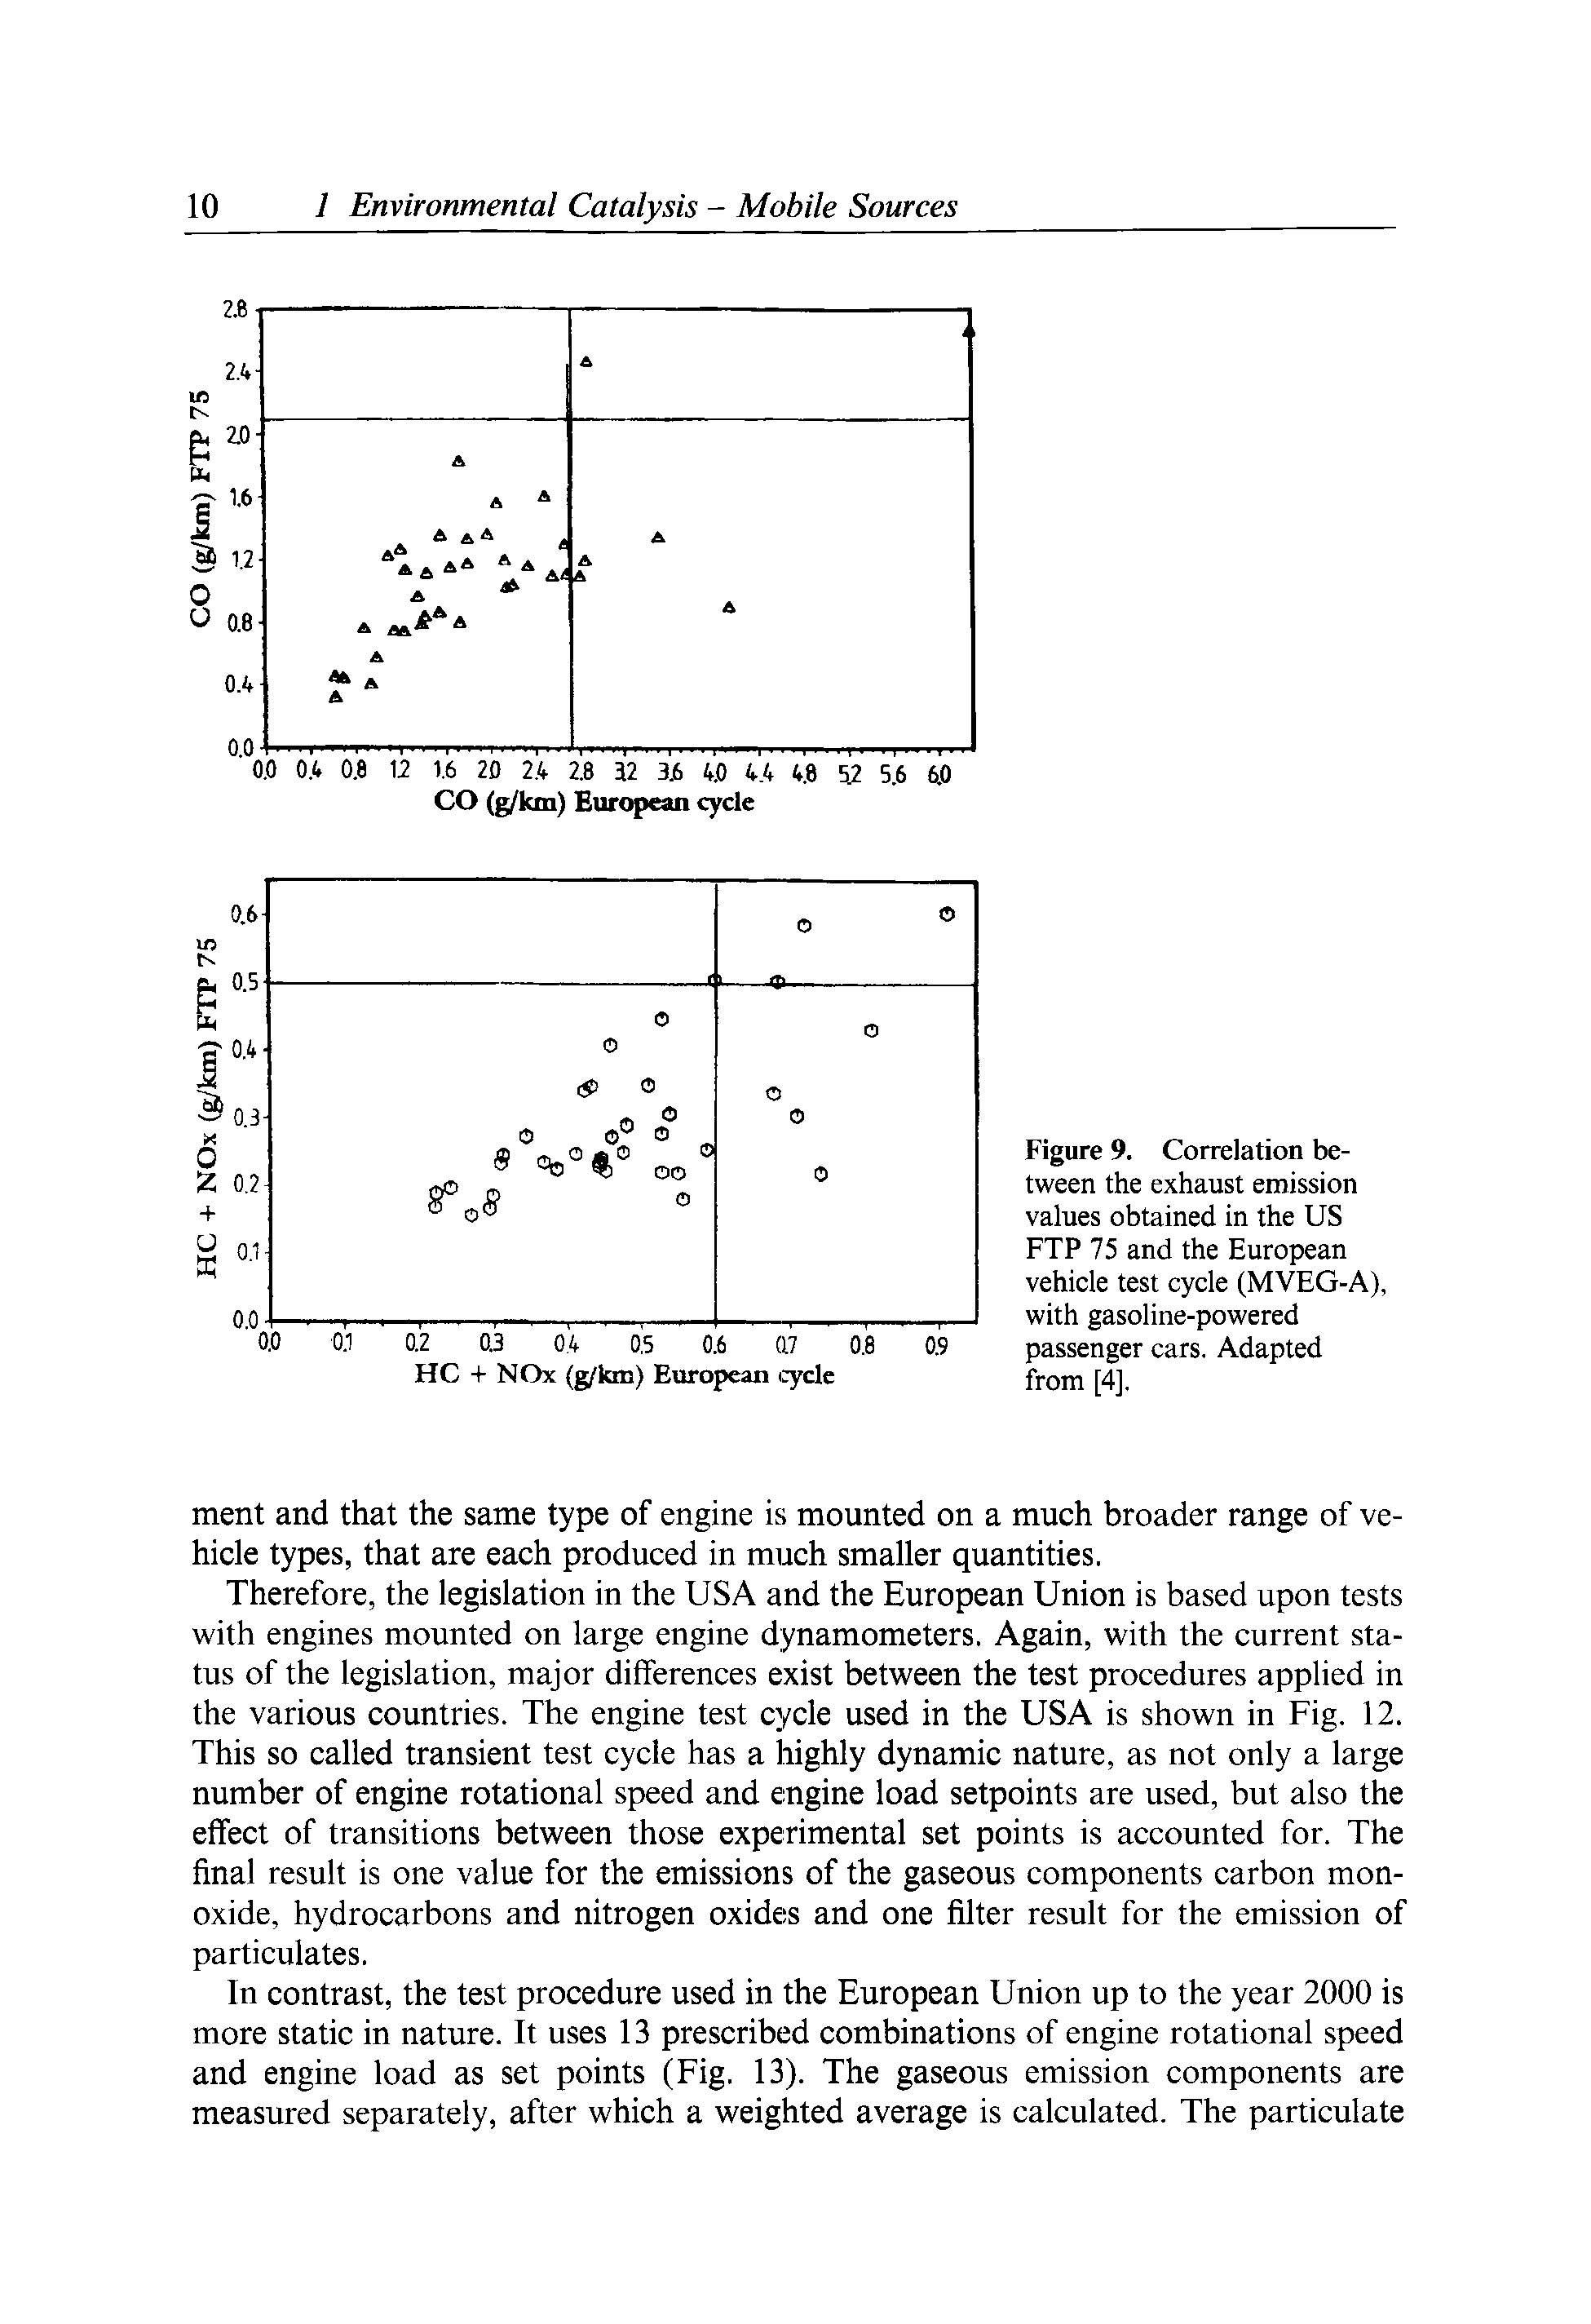 Figure 9. Correlation between the exhaust emission values obtained in the US FTP 75 and the European vehicle test cycle (MVEG-A), with gasoline-powered passenger cars. Adapted from [4].